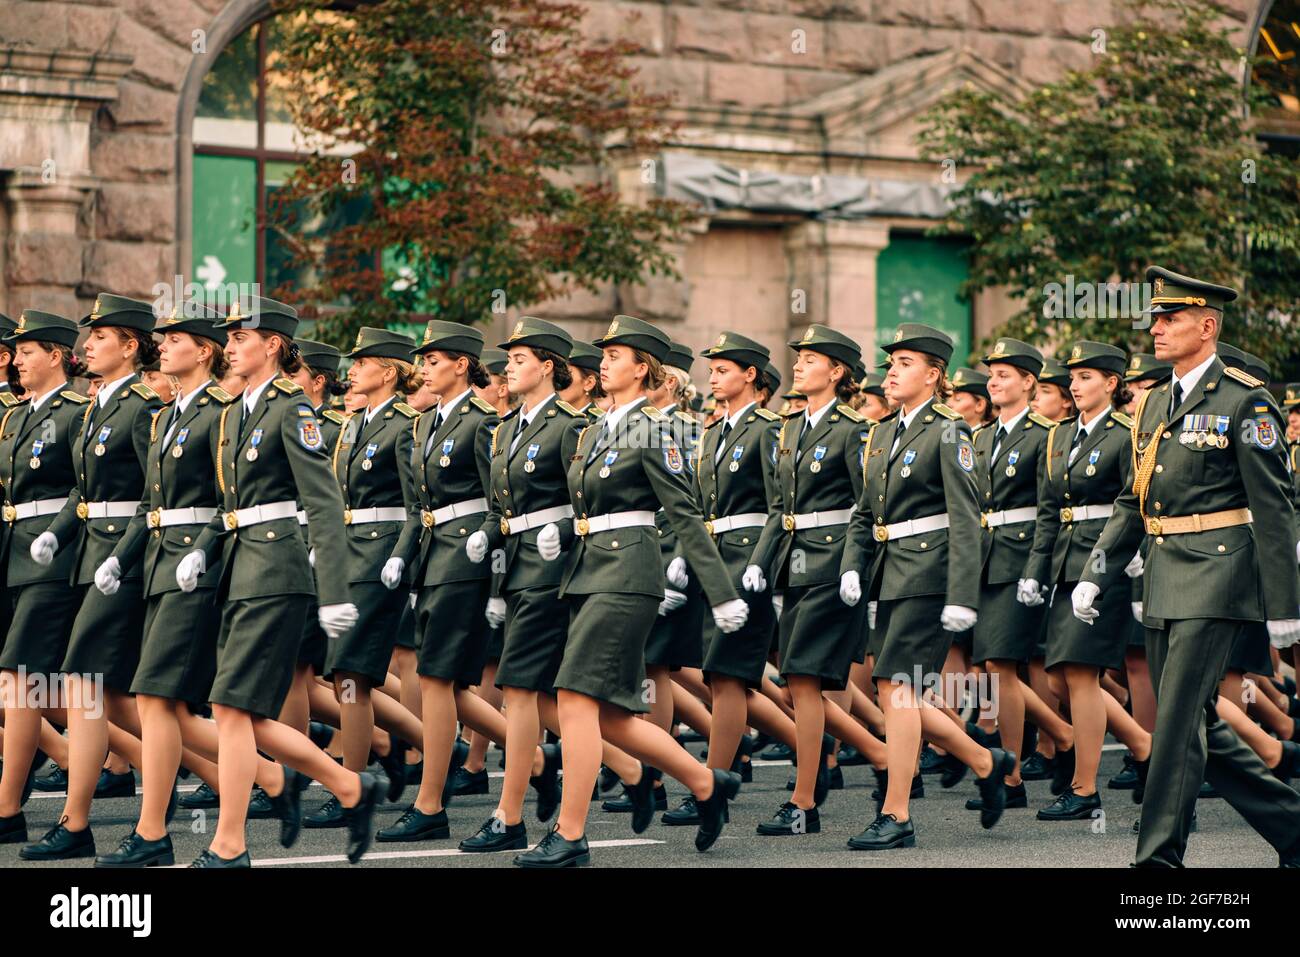 Kyiv, Ukraine - August 22, 2021: Rehearsal of military parade on occasion of 30 years Independence Day of Ukraine. Young female soldiers marching Stock Photo